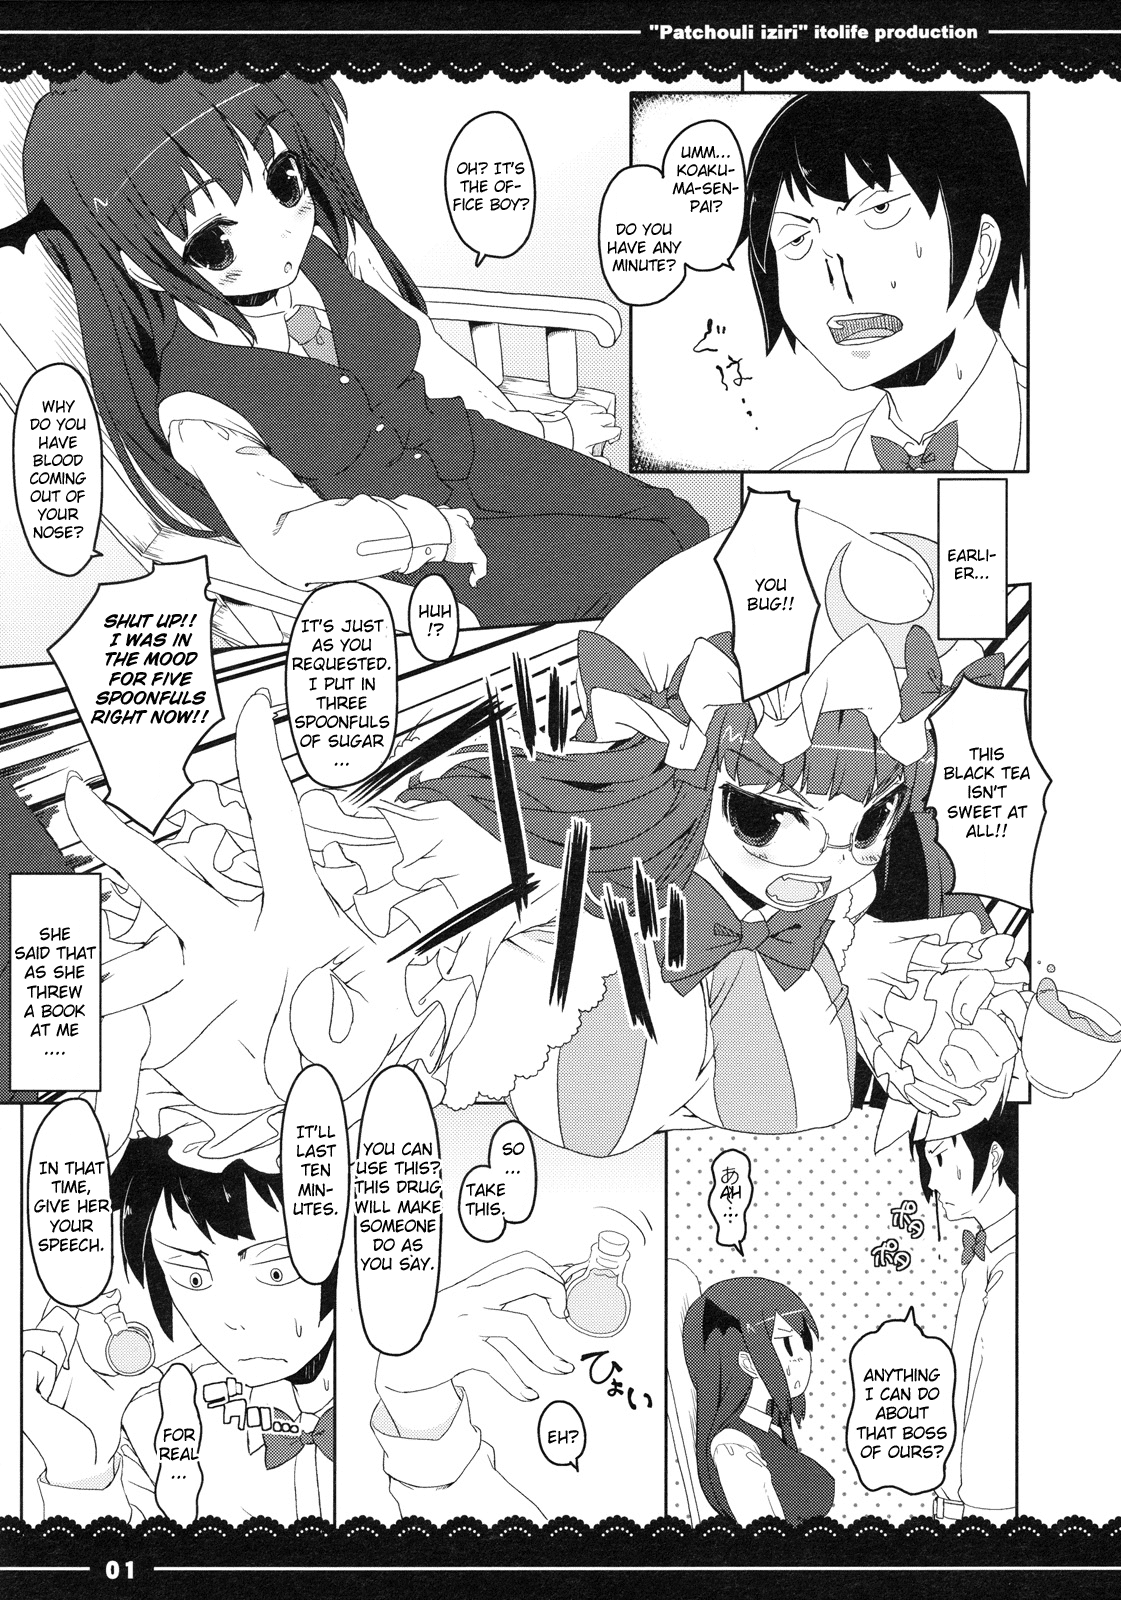 (C79) [Ito Life] Patchouli Ijiri (Touhou Project) [English] [CGRascal] (C79) [伊東ライフ] パチュリイジリ (東方Project) [英訳]